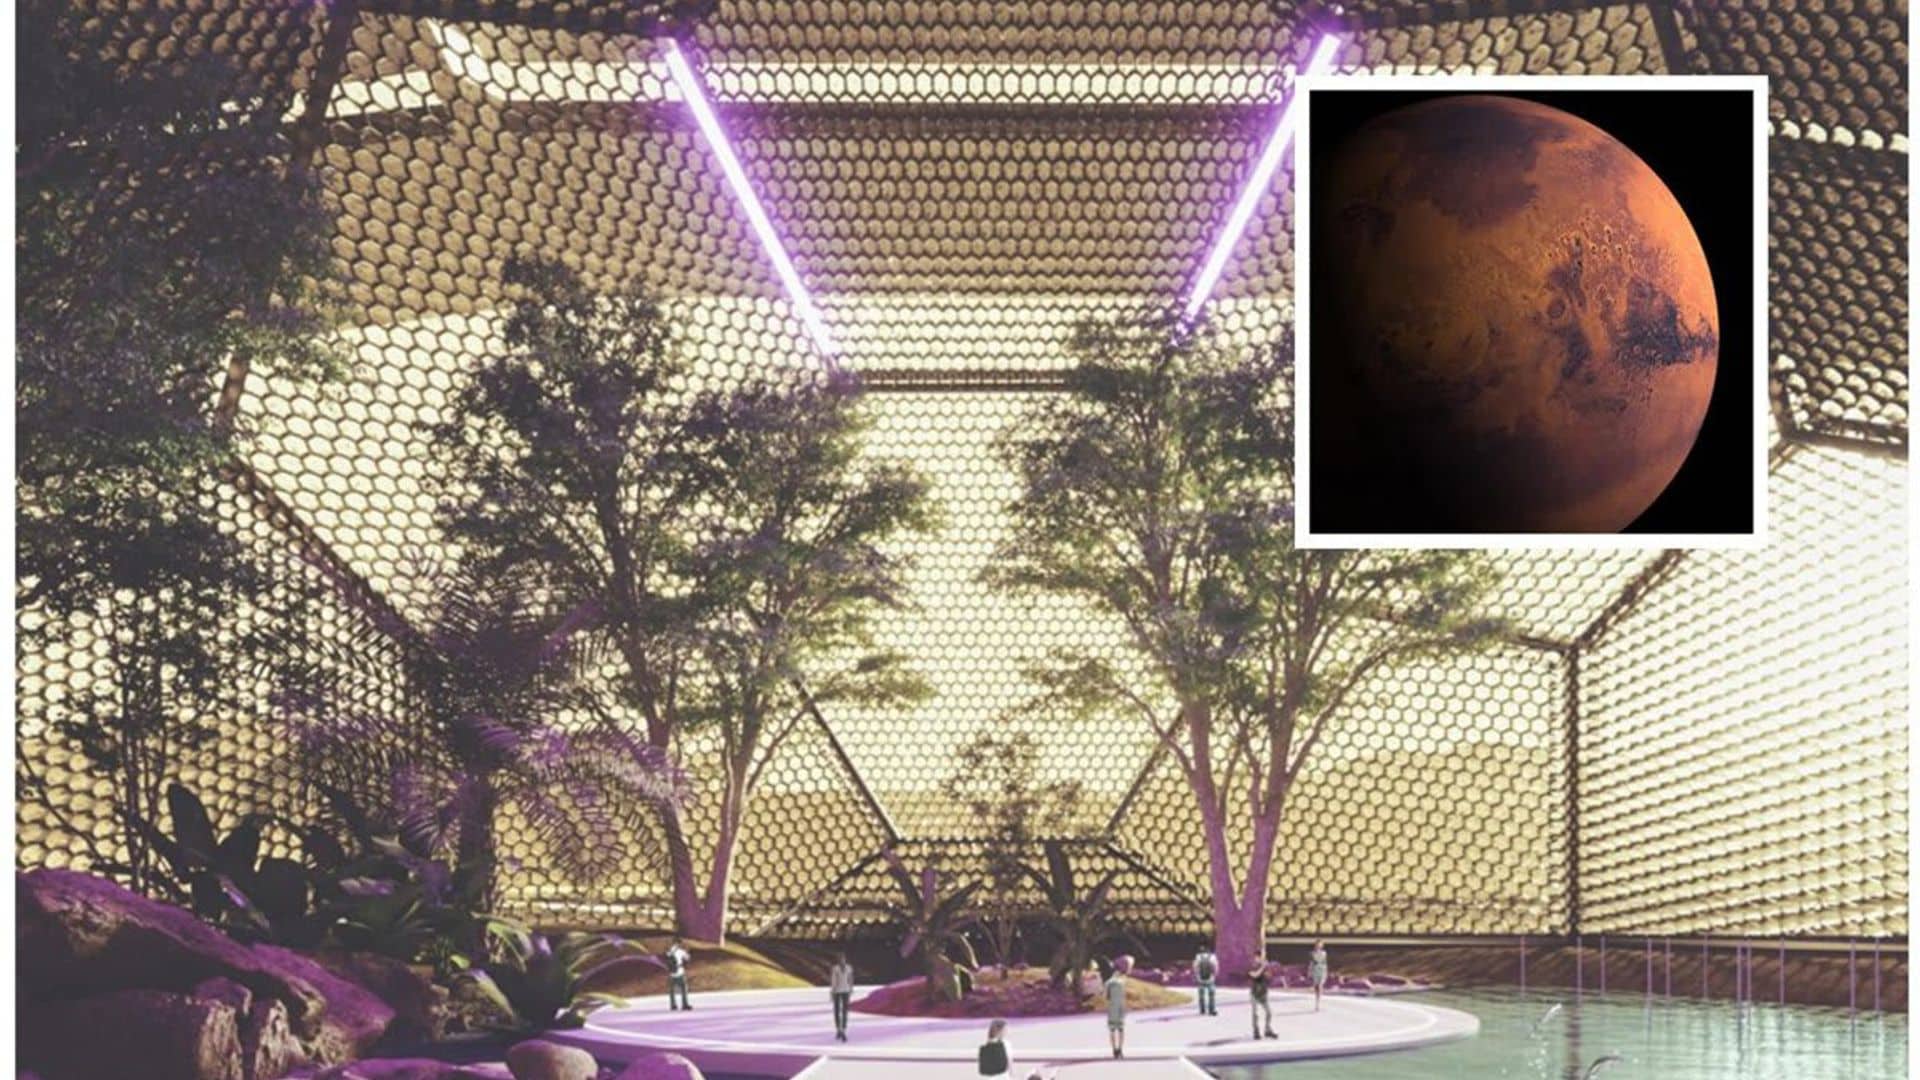 Plans for The First Sustainable City on Mars.